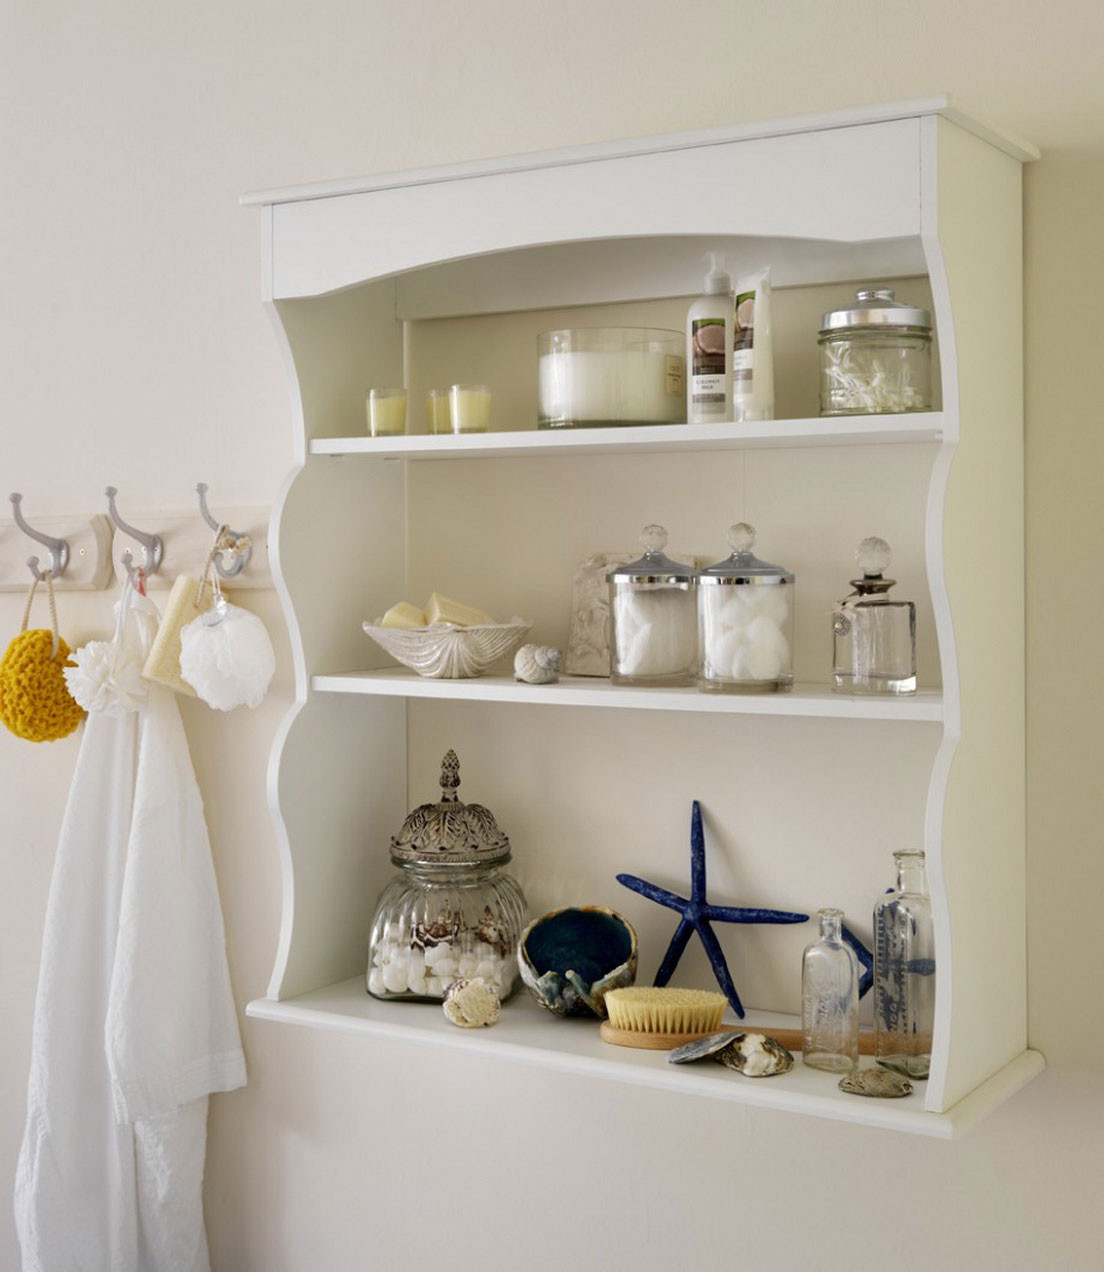 Kitchen Wall Storage Ideas
 Wall Shelving Ideas for Your Kitchen Storage Solution